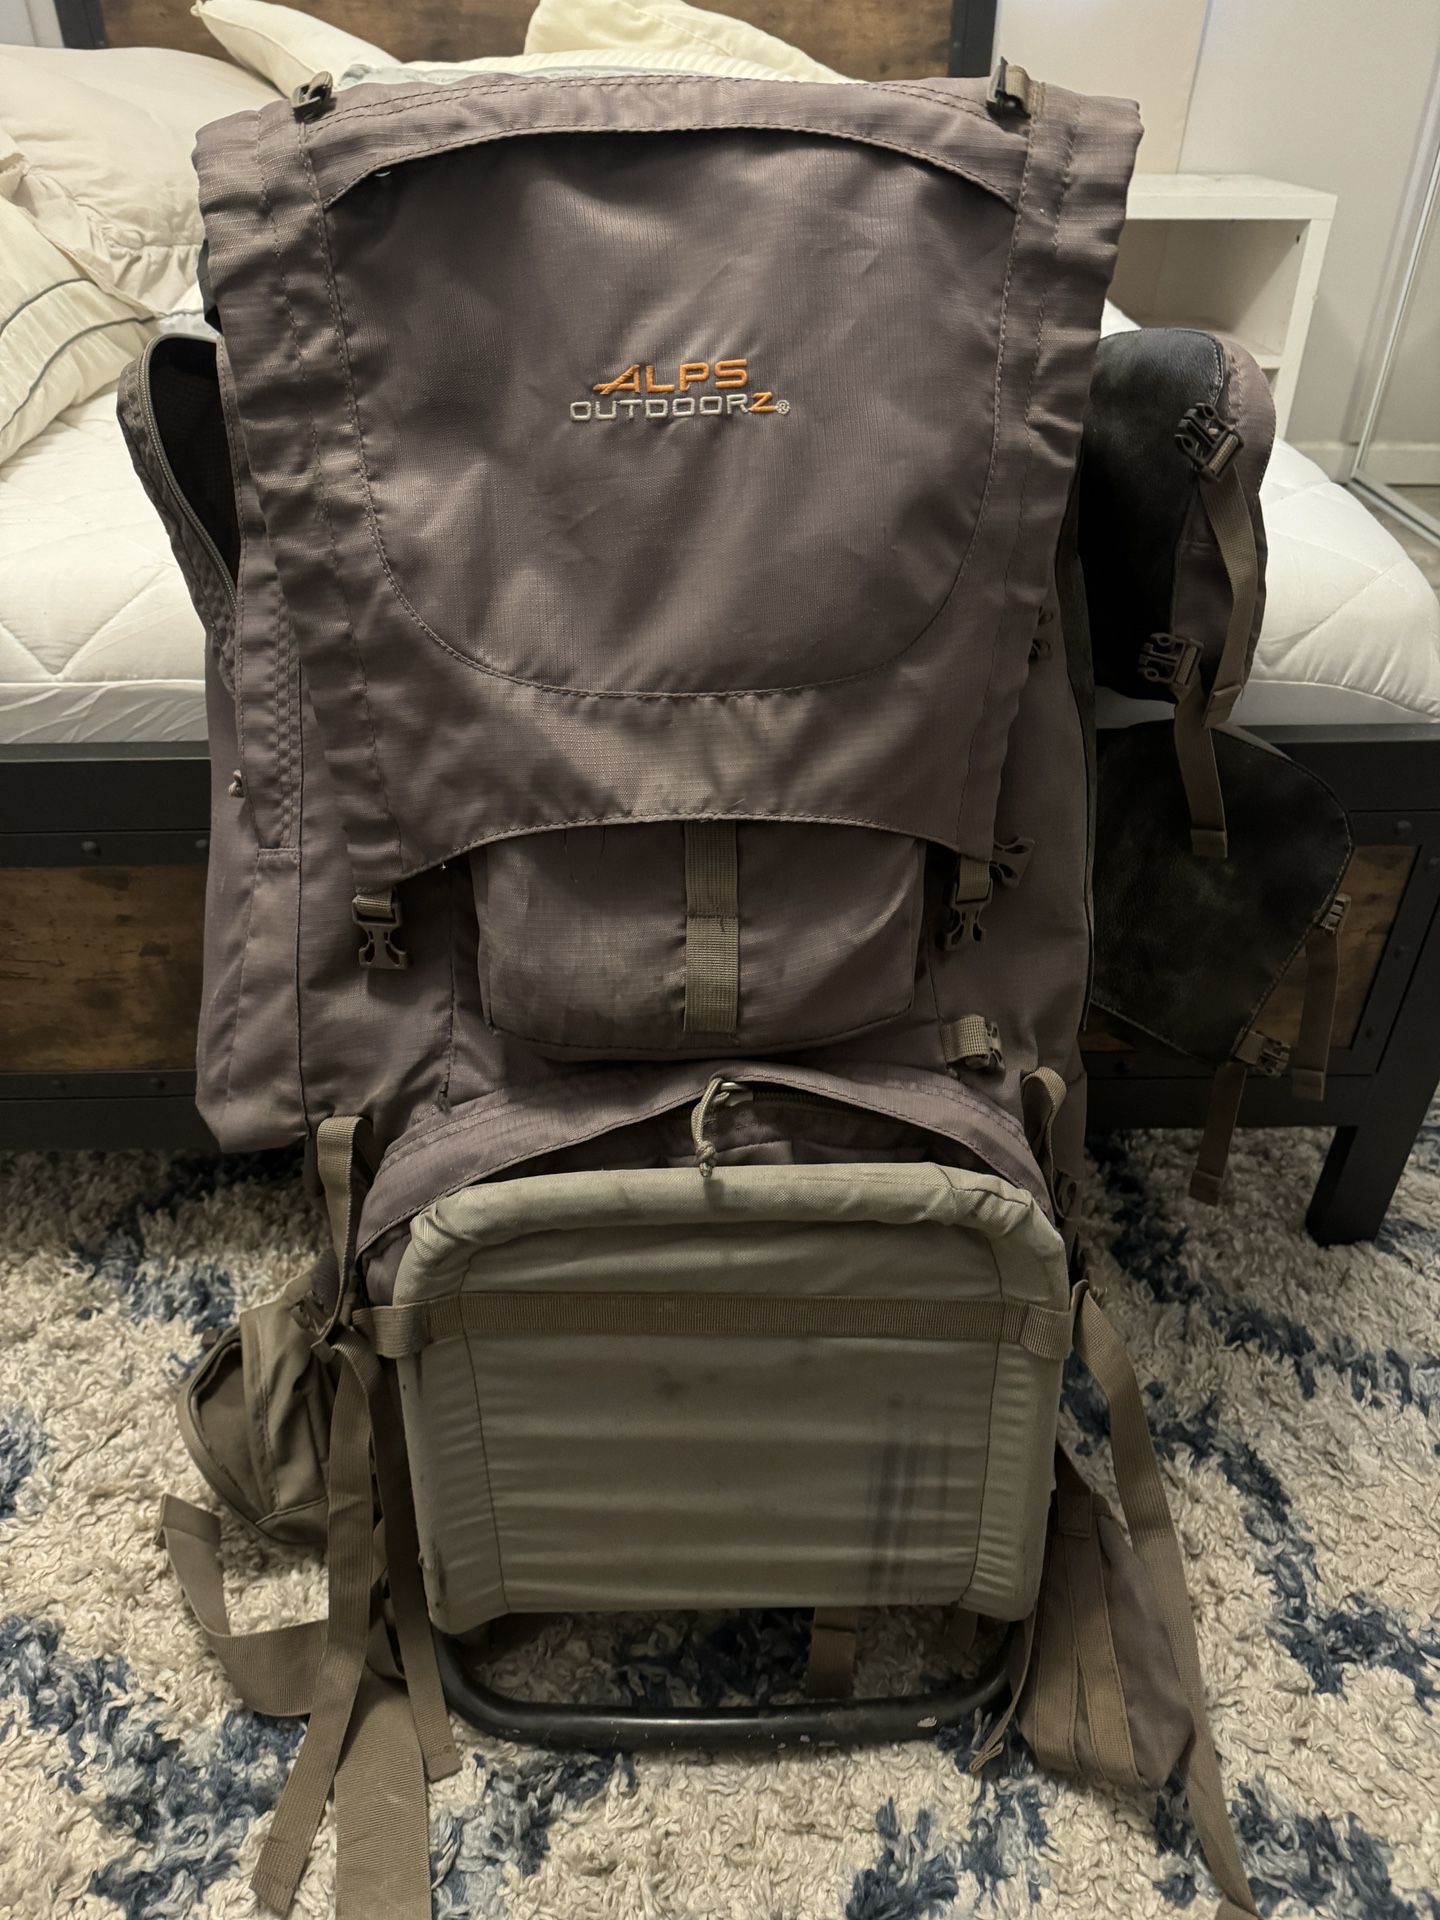 Hunting Backpack - ALPS Outdoorz Commander